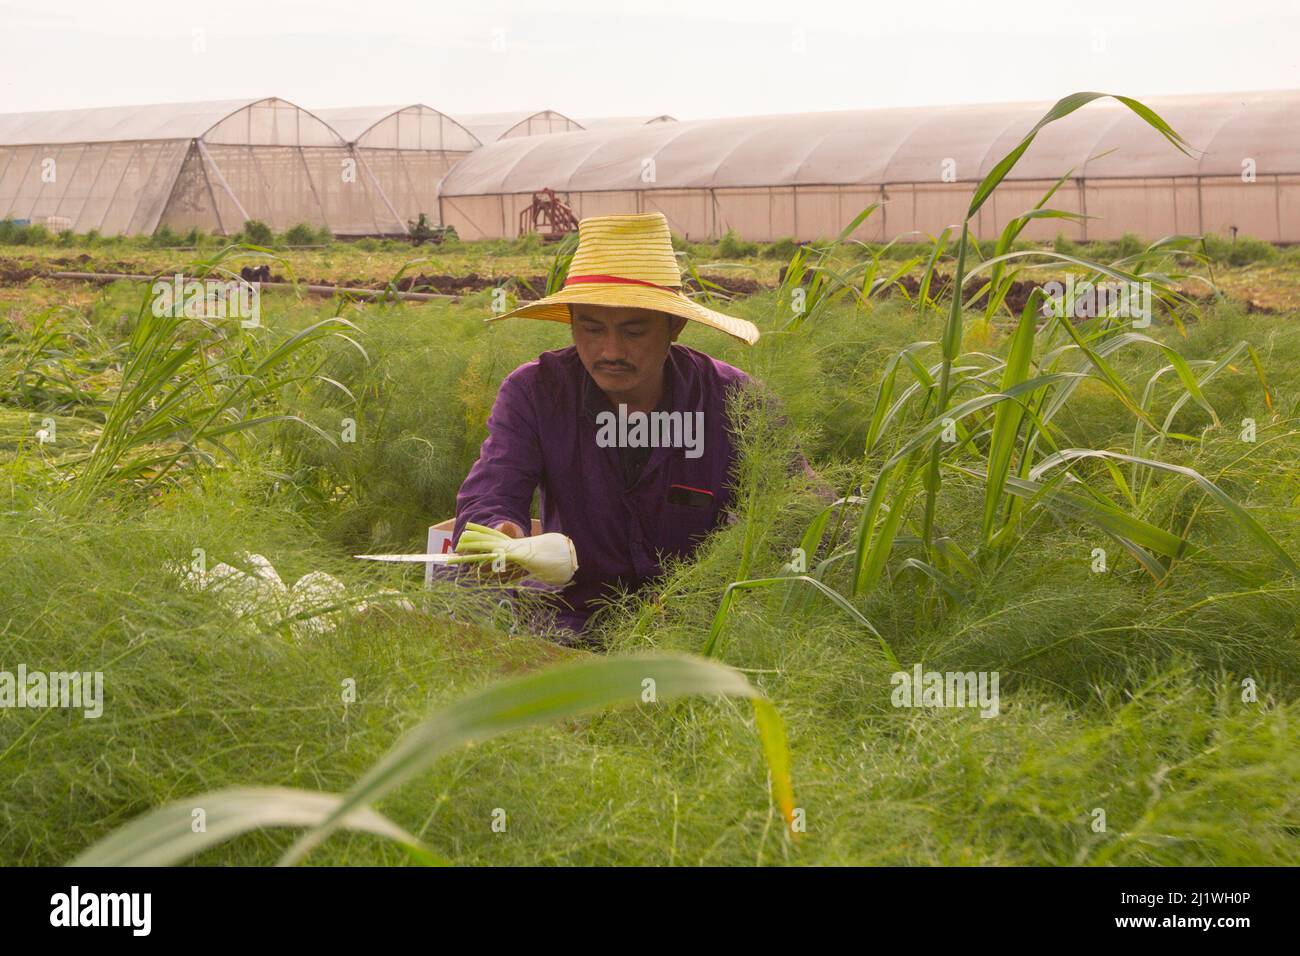 Thai migrant works pick kohlrabi in a field on a Kibbutz Photographed in israel Stock Photo